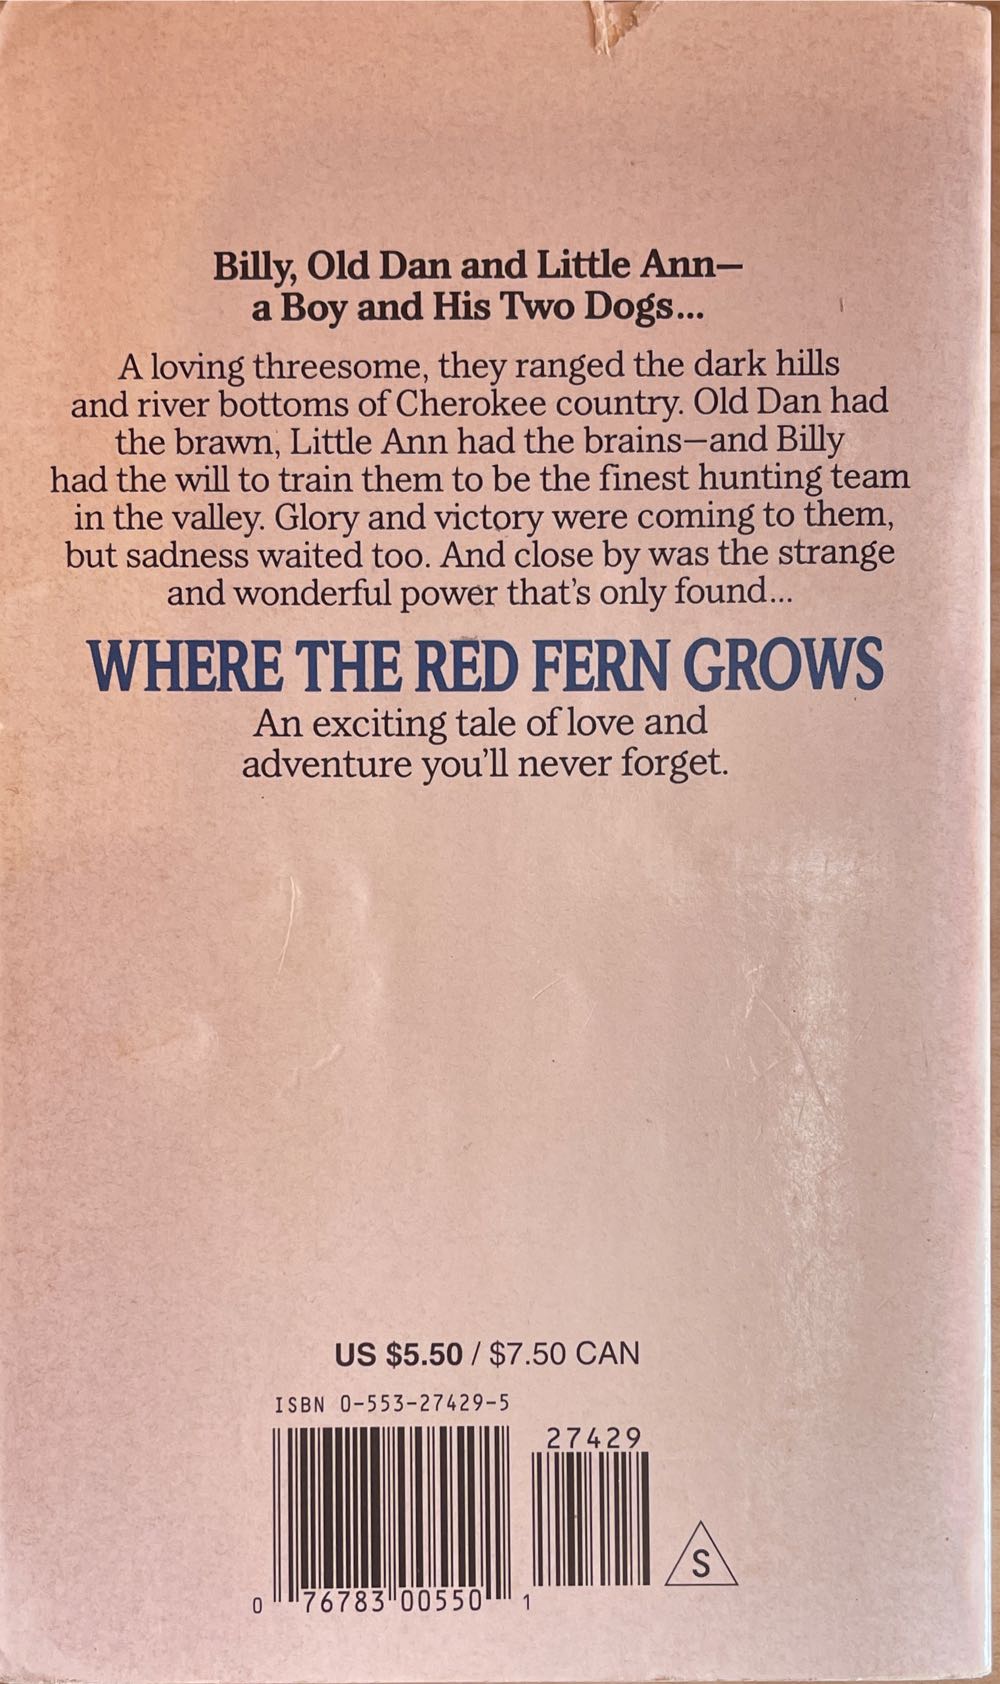 Where the Red Fern Grows - Wilson Rawls (Laurel Leaf - Paperback) book collectible [Barcode 9780553274295] - Main Image 2